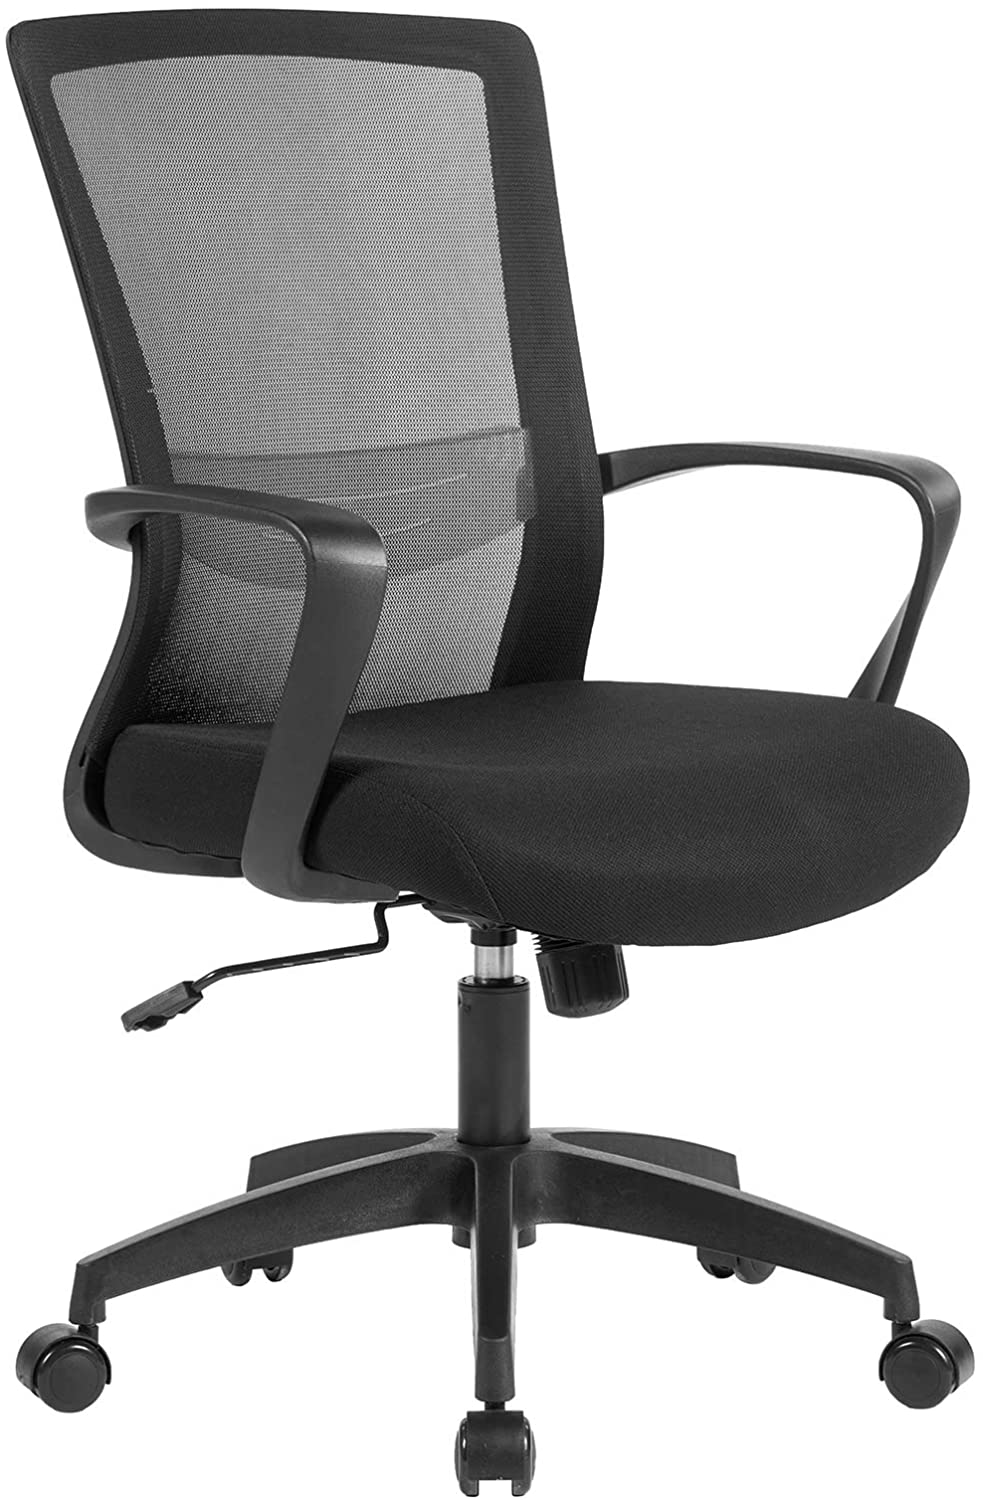 UNICOO – Home Office Chair Ergonomic Mid-Back Swivel Chair, Mesh Computer  Chair, Office Task Desk Chair, Home Comfort Chairs with Armrests (W-208-1  